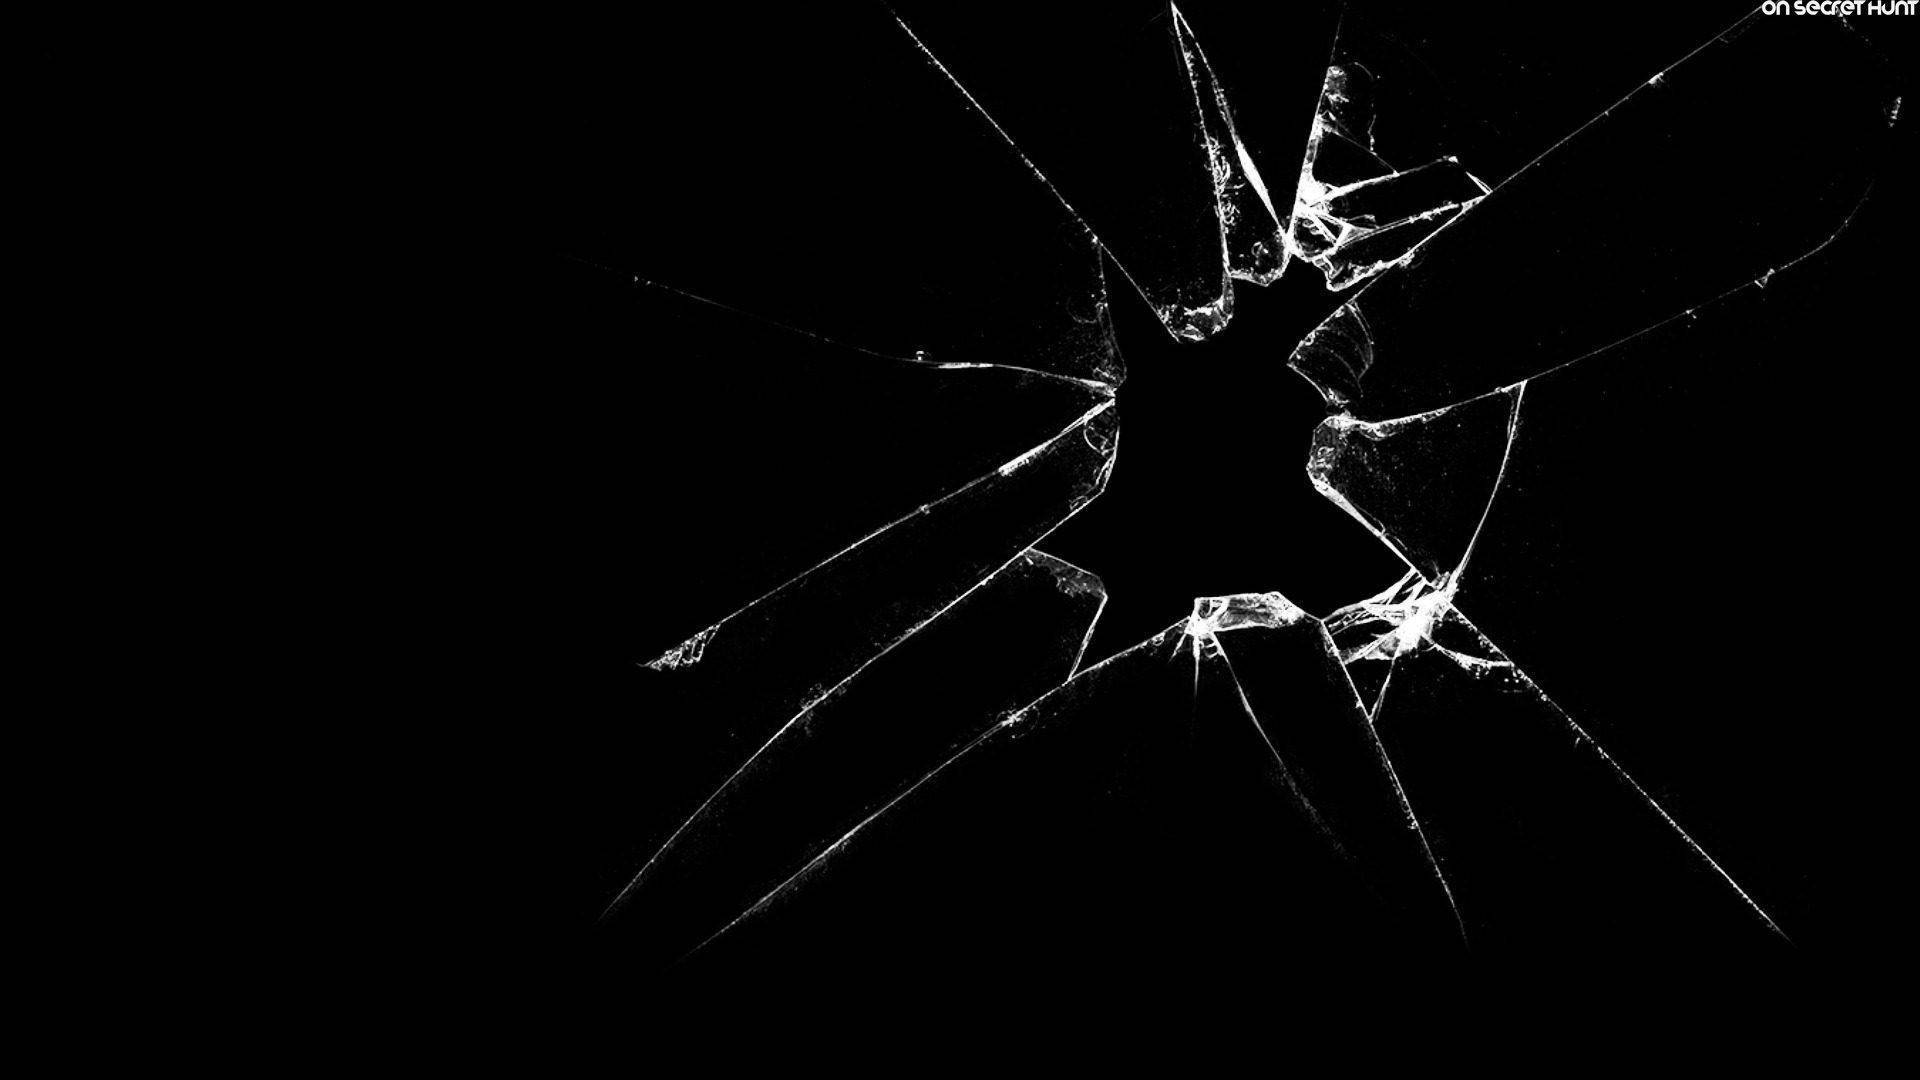 A Black And White Image Of A Broken Glass Wallpaper